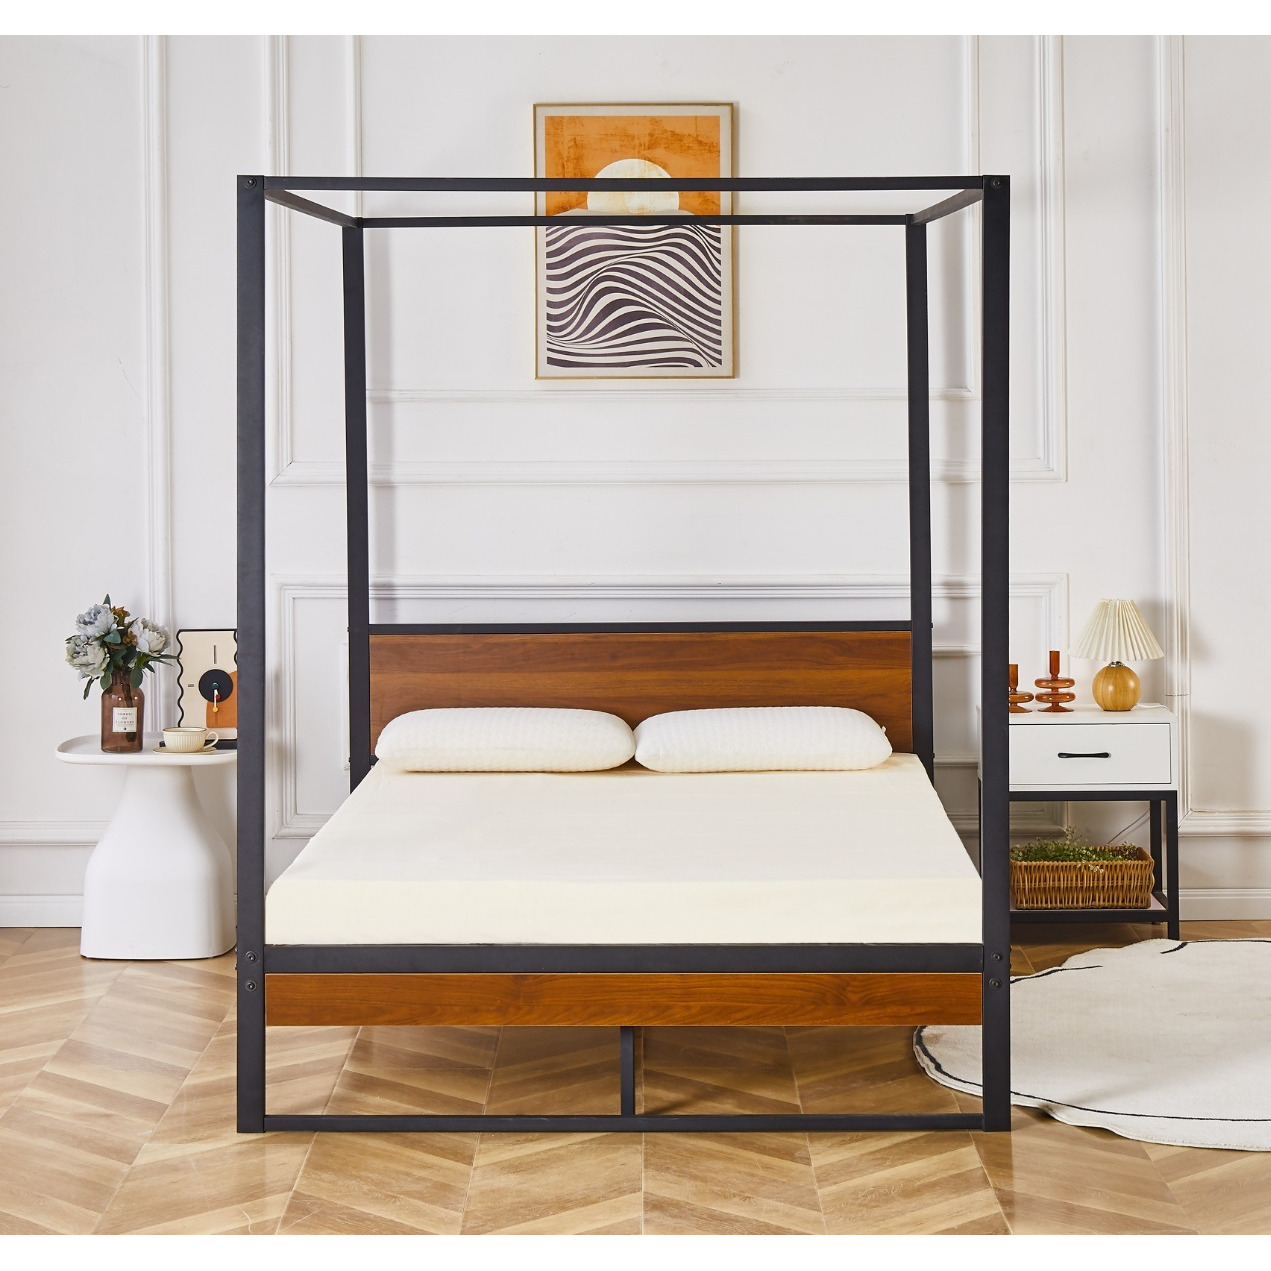 Flair Rockford Wooden Metal 4 Poster Bed Frame Small Double - image 1